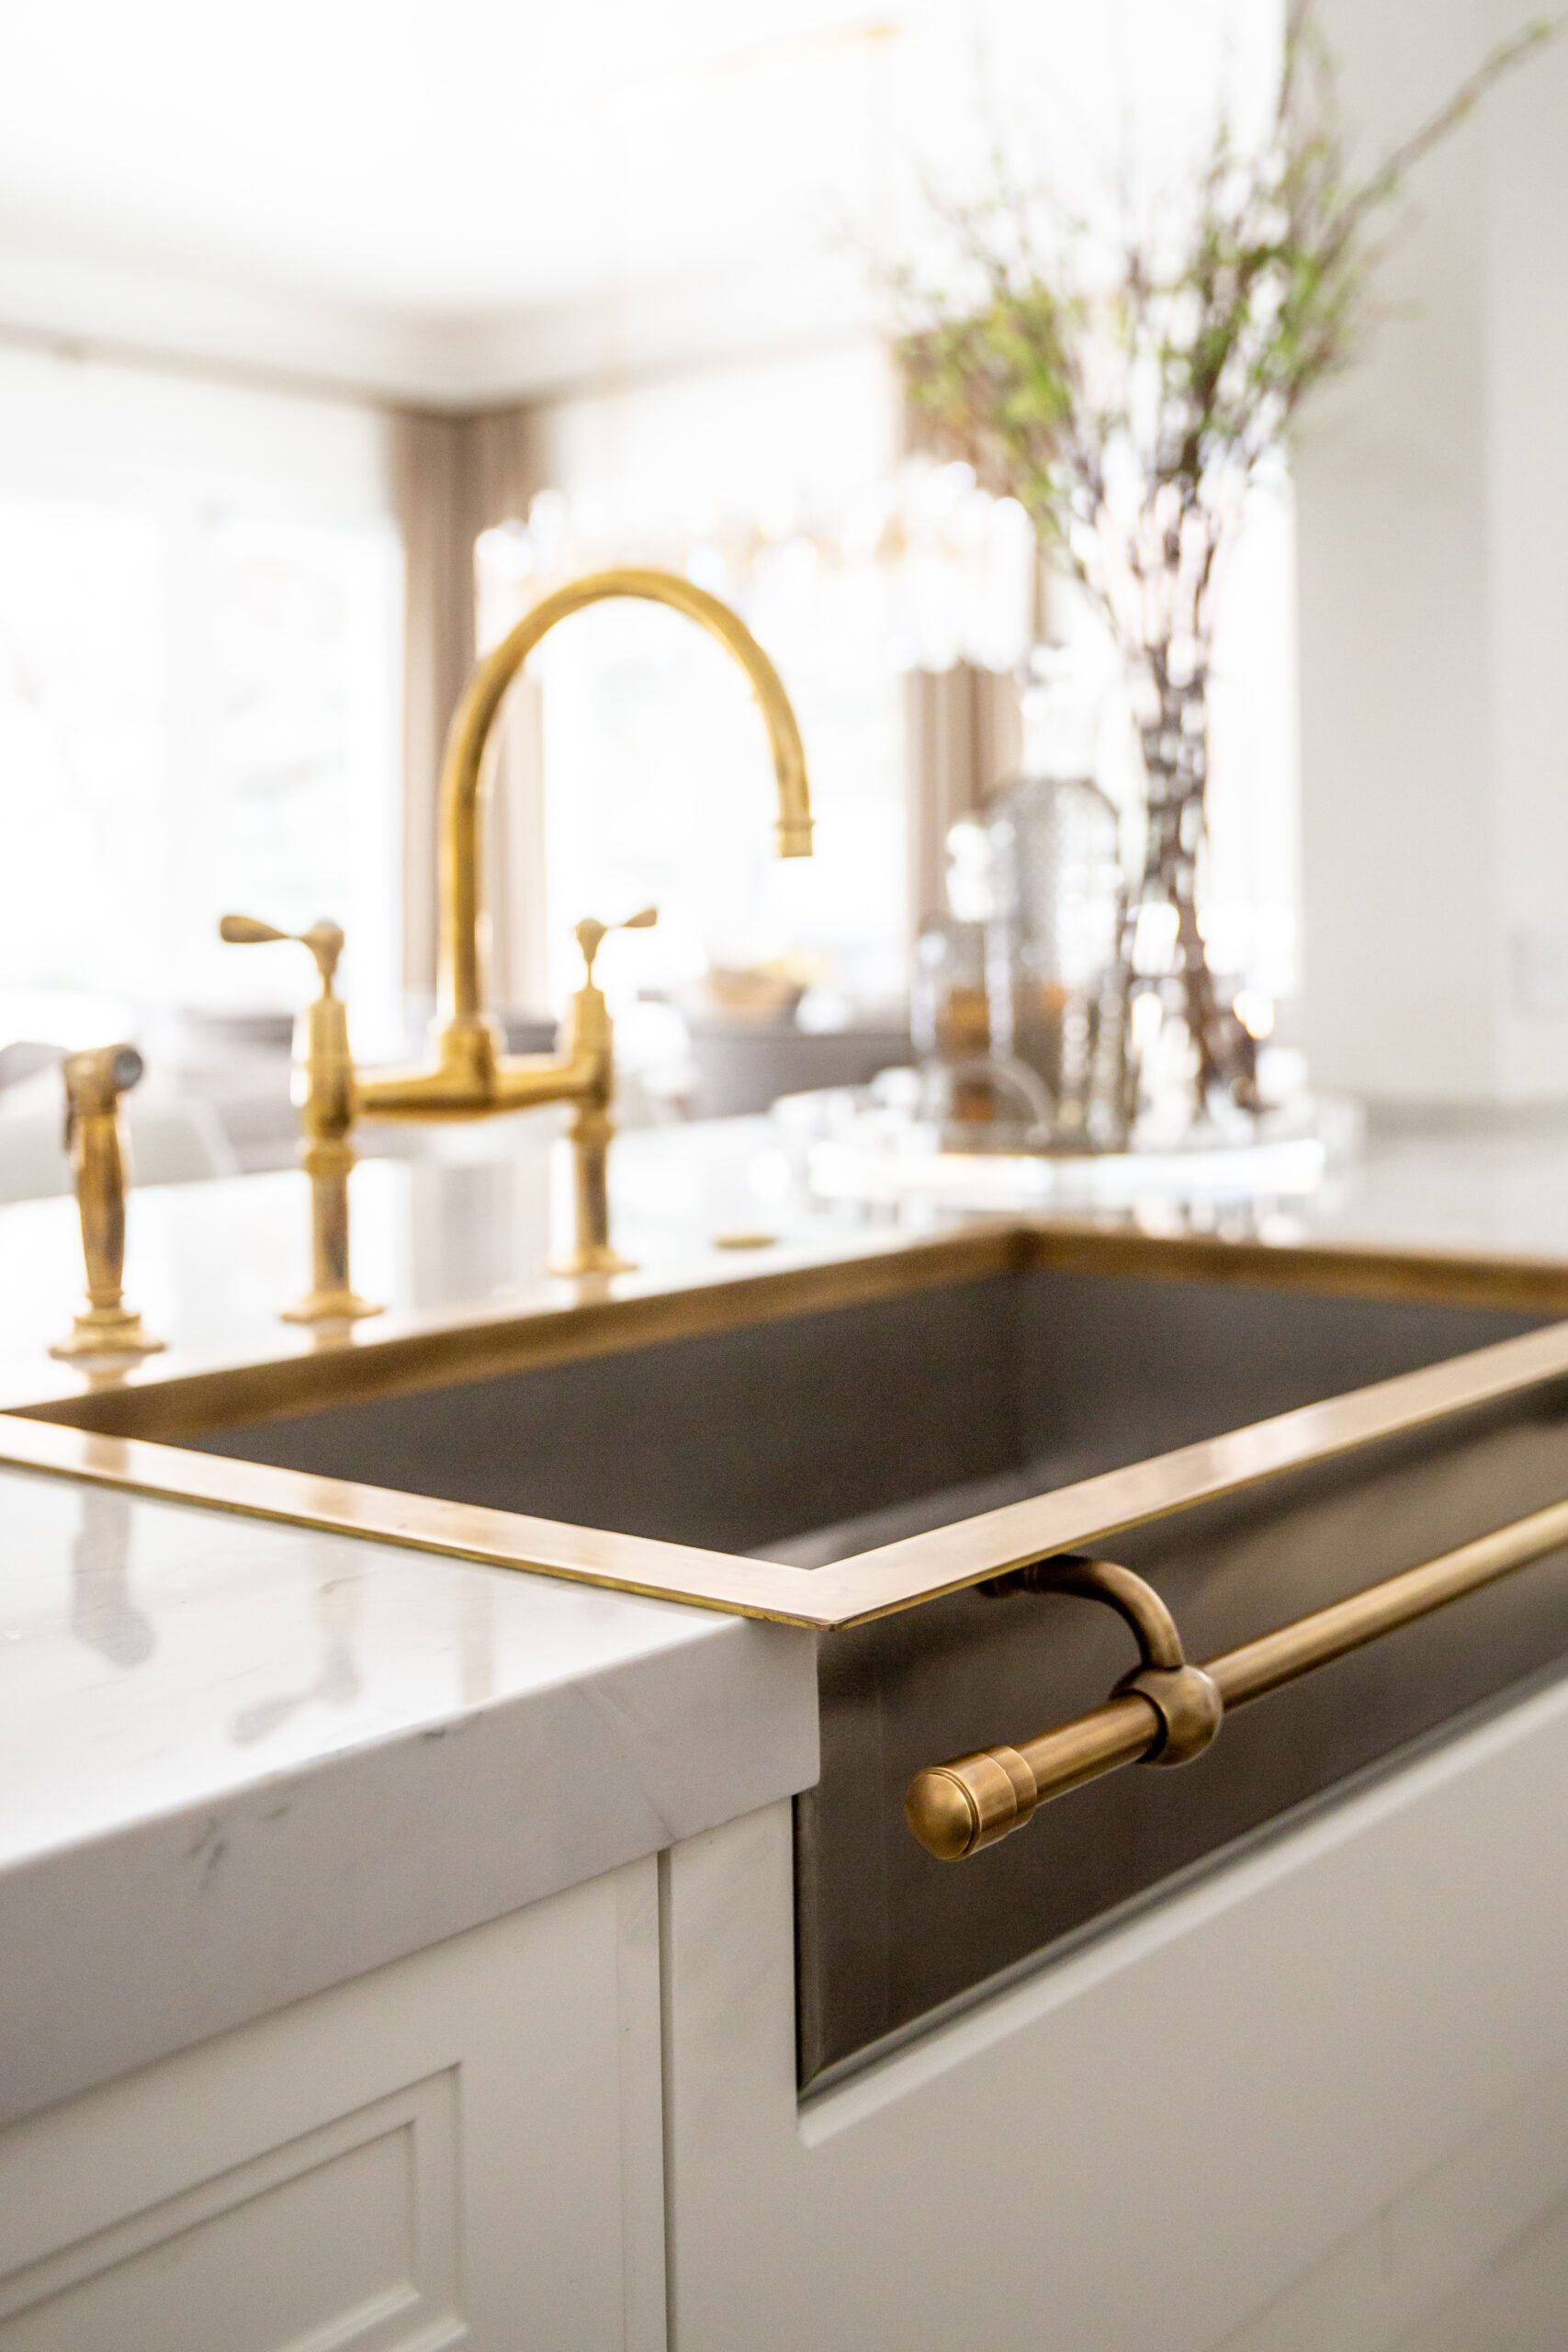 Kitchen sinks with faucets